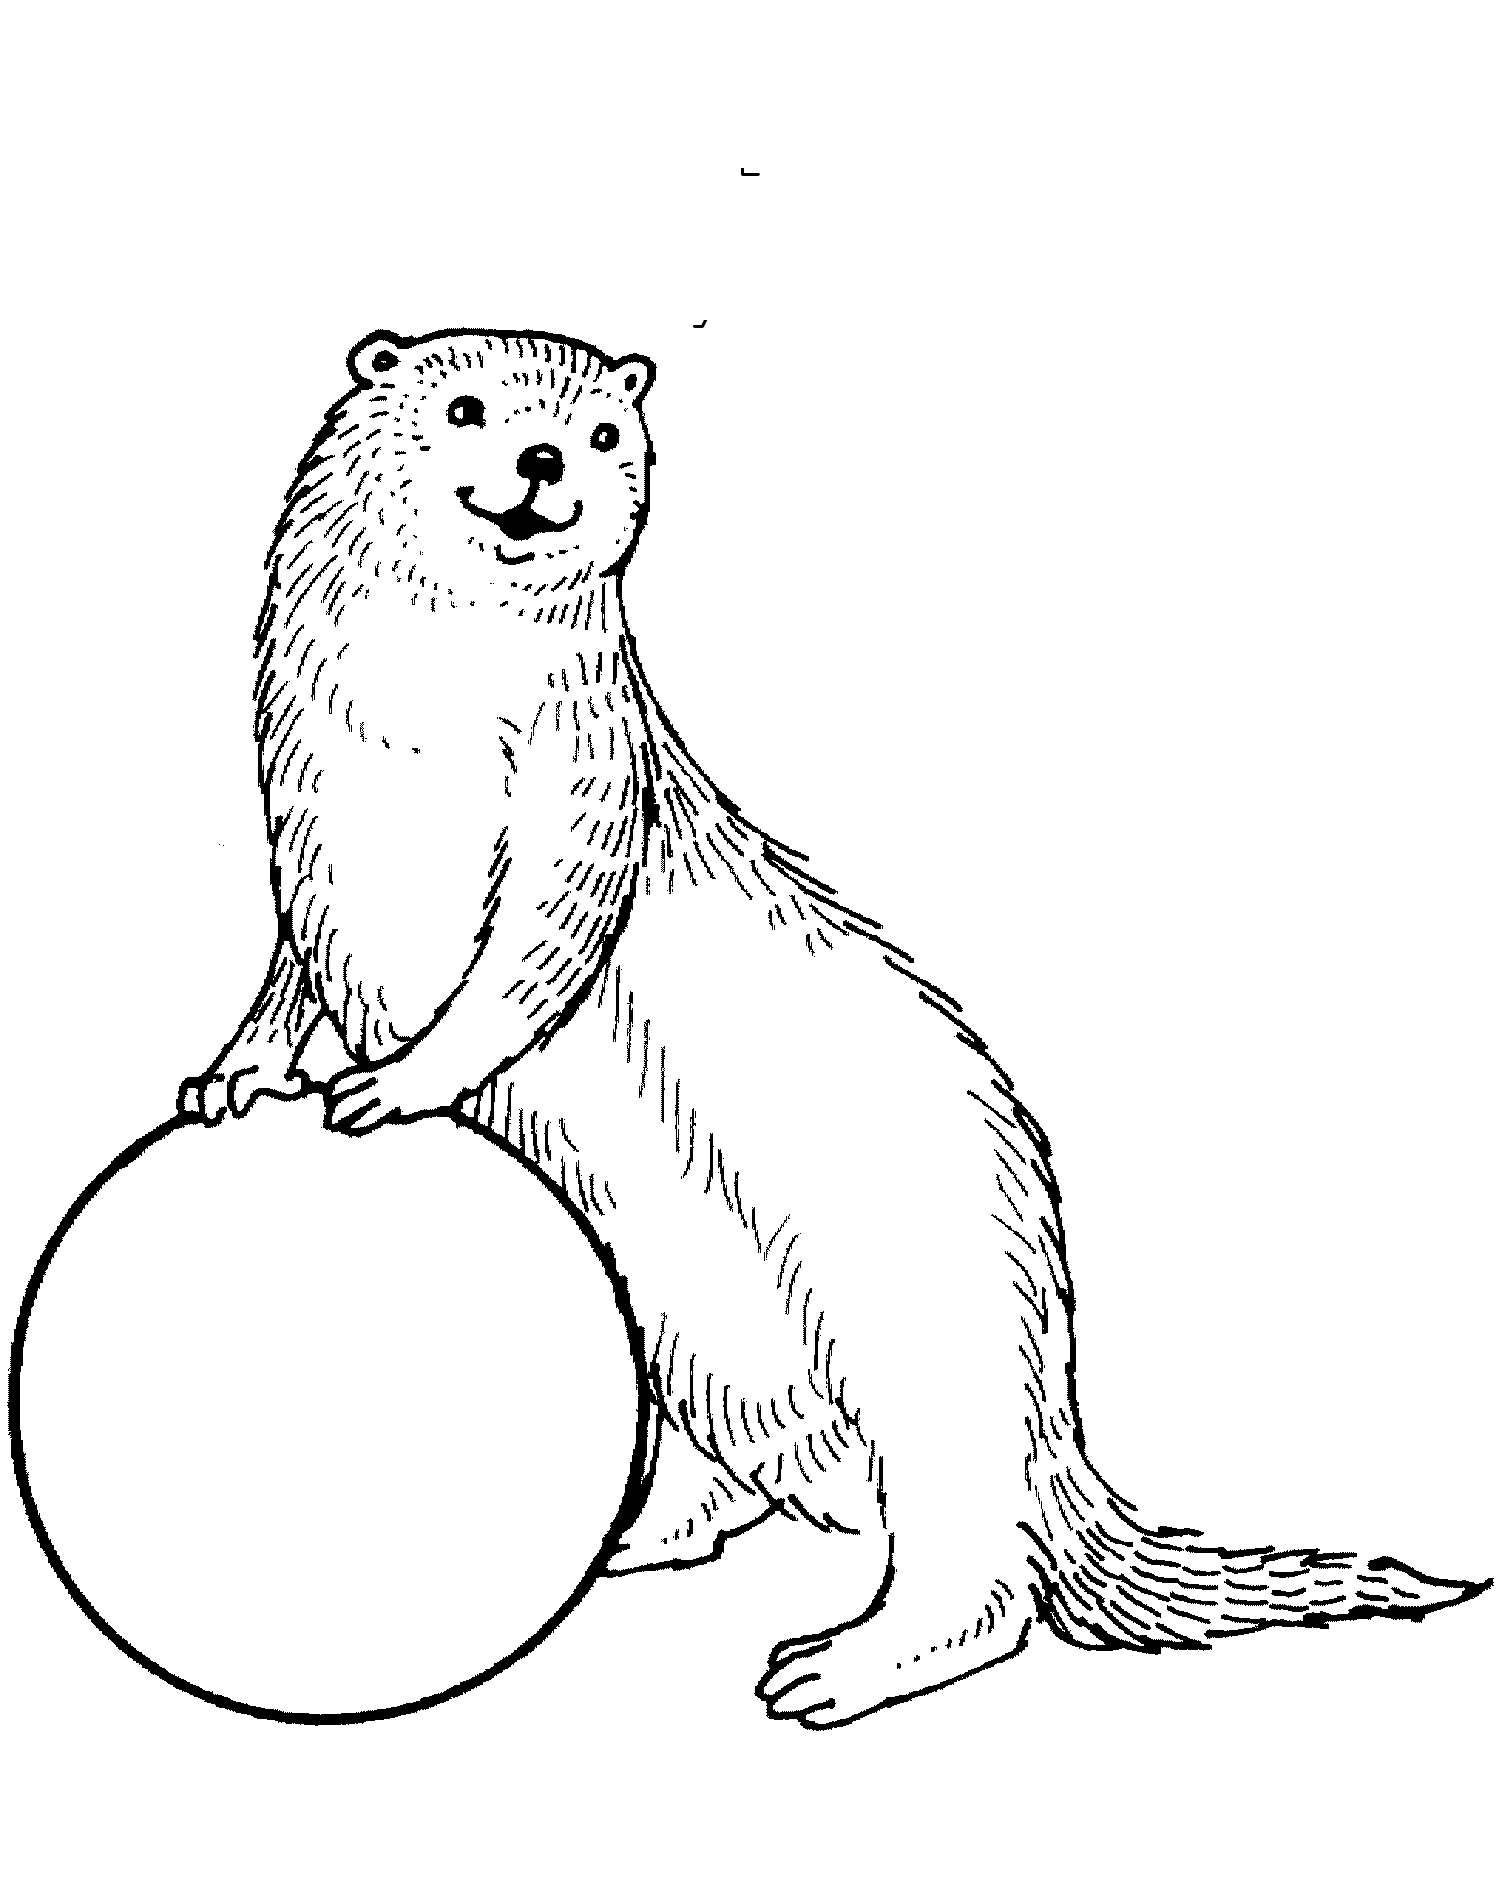 sup otter coloring pages